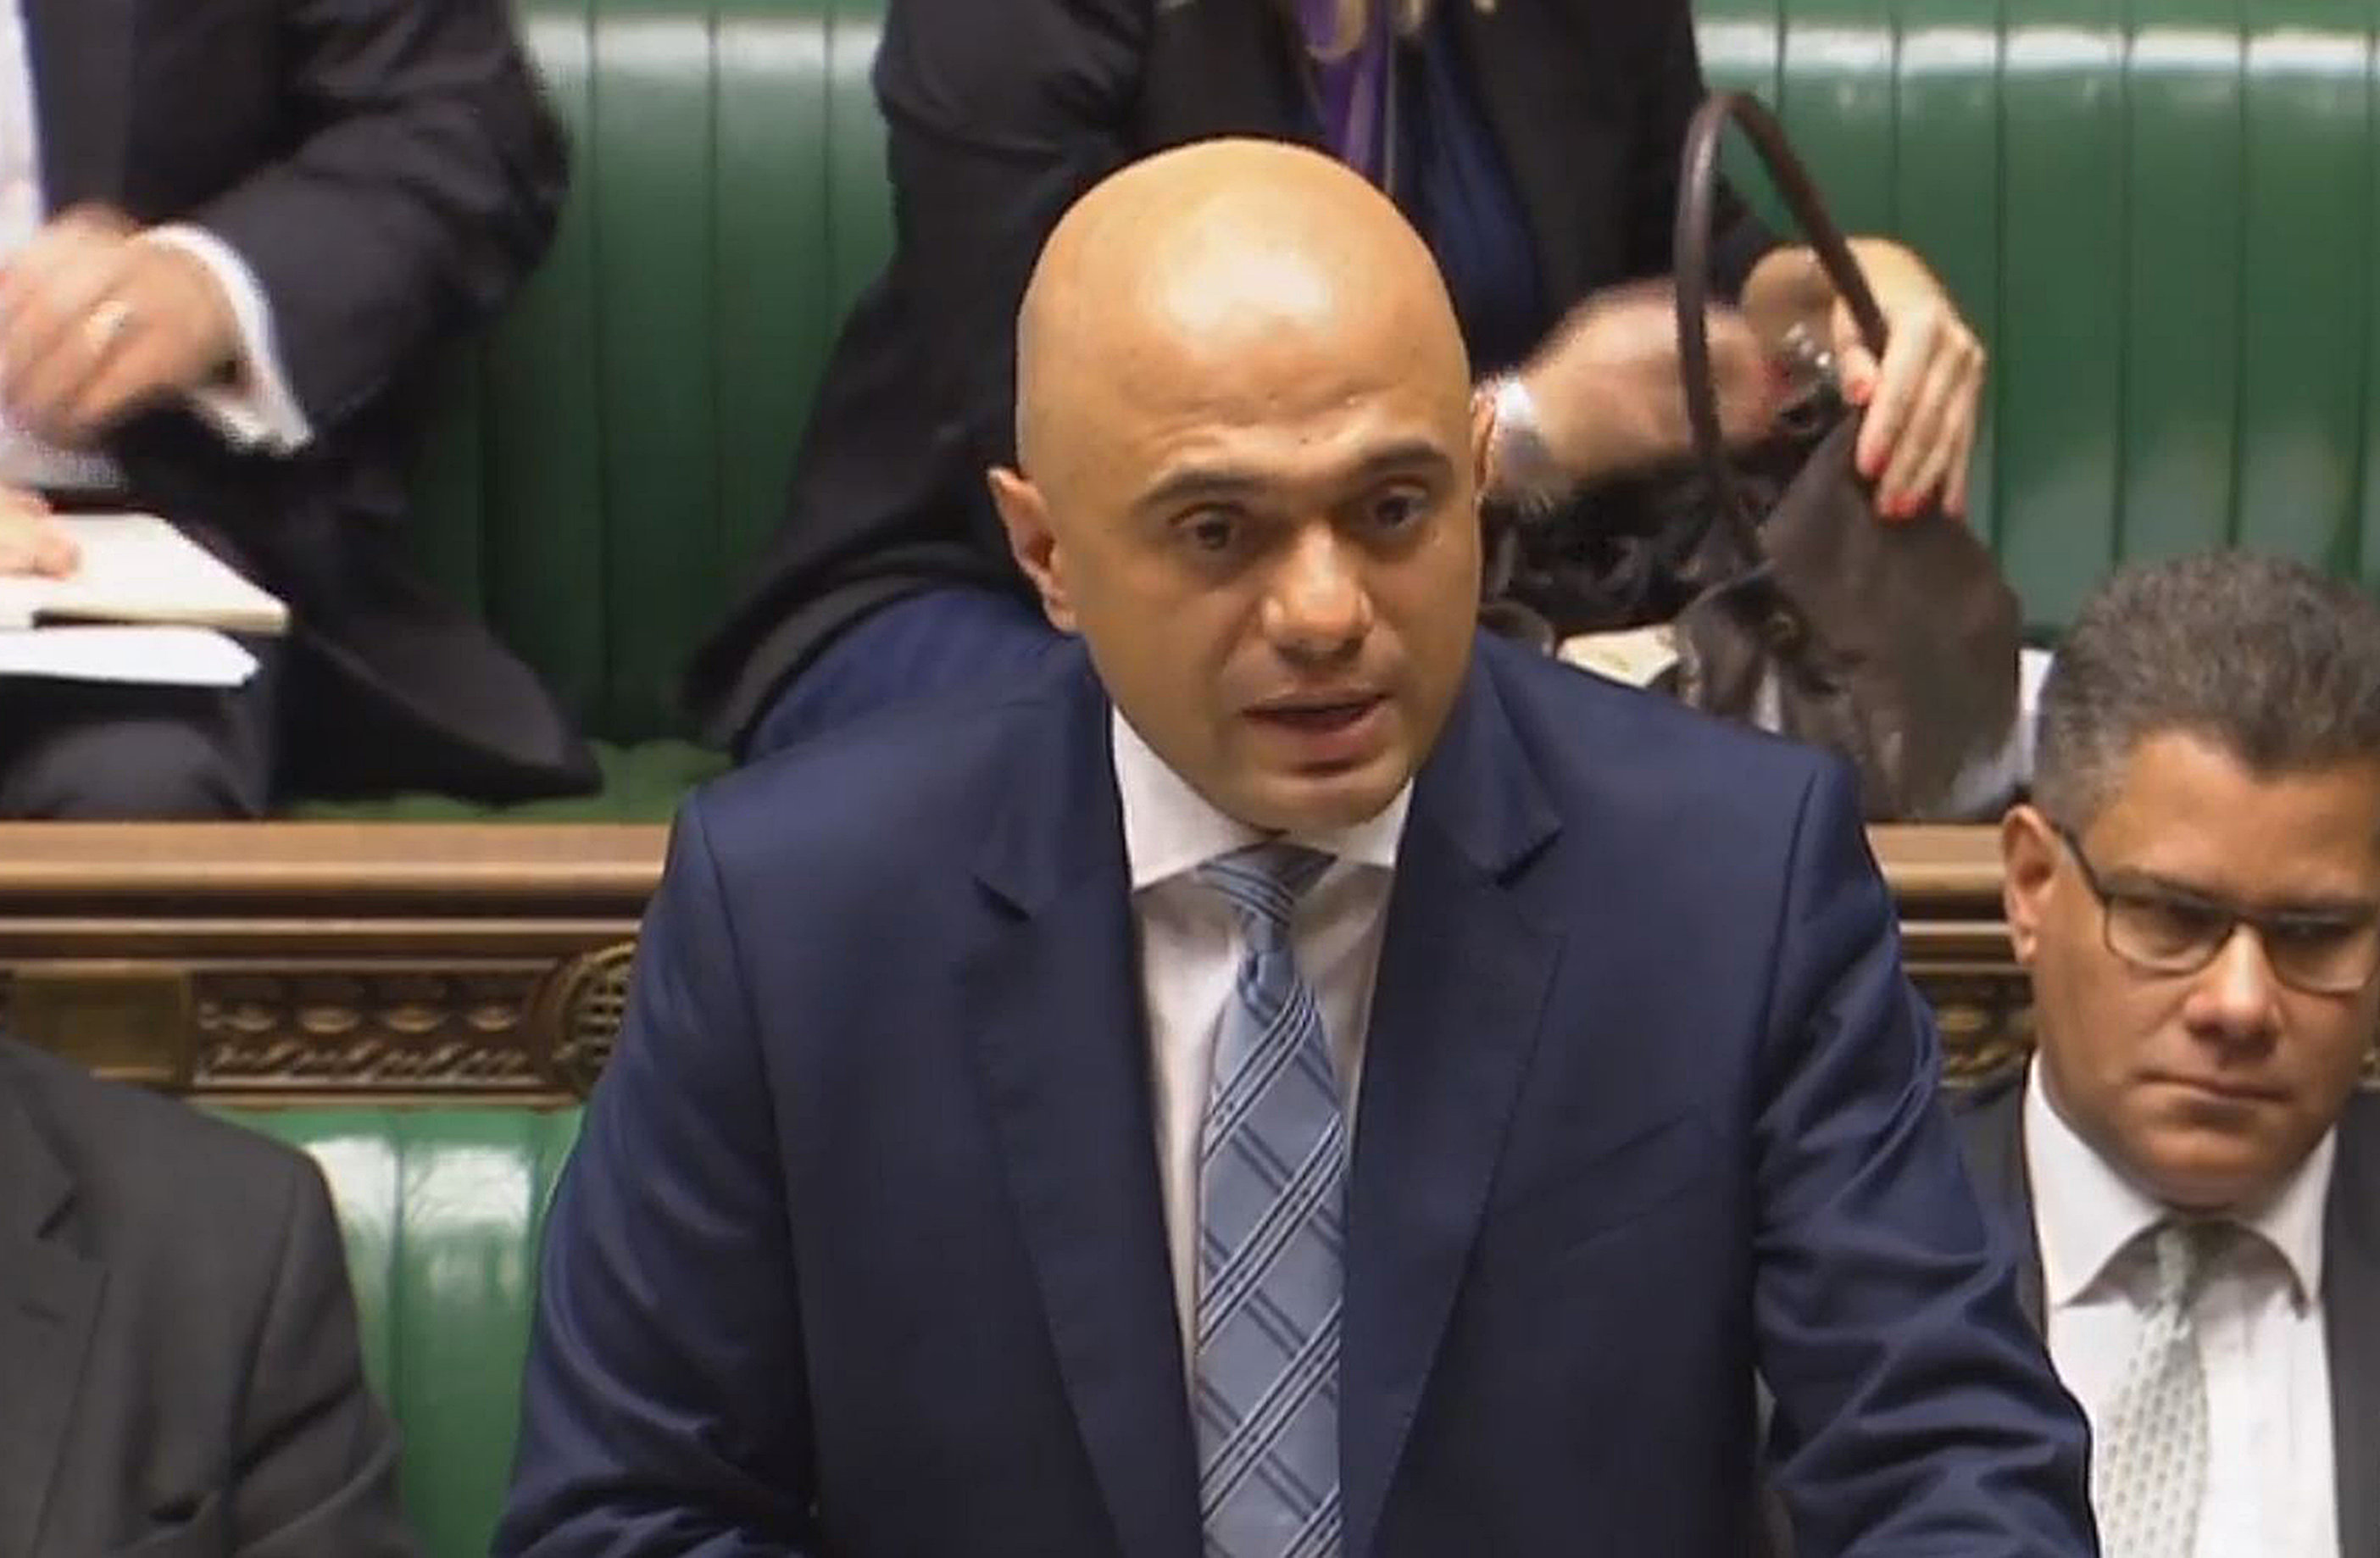 Sajid Javid was questioned in the Commons this week.